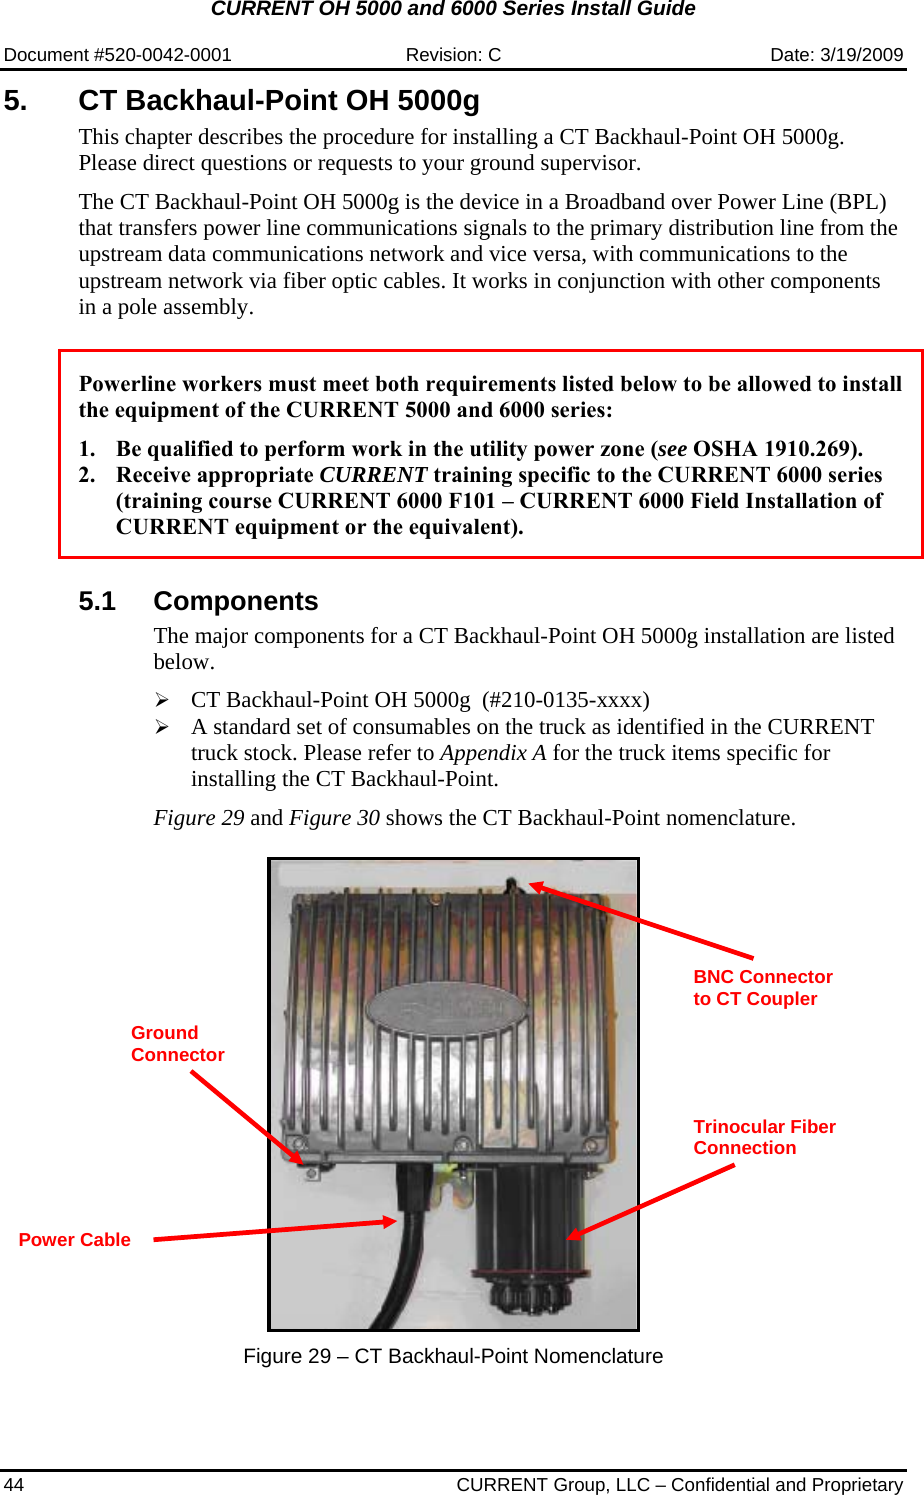 CURRENT OH 5000 and 6000 Series Install Guide  Document #520-0042-0001  Revision: C  Date: 3/19/2009 44  CURRENT Group, LLC – Confidential and Proprietary 5.  CT Backhaul-Point OH 5000g  This chapter describes the procedure for installing a CT Backhaul-Point OH 5000g. Please direct questions or requests to your ground supervisor.  The CT Backhaul-Point OH 5000g is the device in a Broadband over Power Line (BPL) that transfers power line communications signals to the primary distribution line from the upstream data communications network and vice versa, with communications to the upstream network via fiber optic cables. It works in conjunction with other components in a pole assembly.    Powerline workers must meet both requirements listed below to be allowed to install the equipment of the CURRENT 5000 and 6000 series:  1. Be qualified to perform work in the utility power zone (see OSHA 1910.269). 2. Receive appropriate CURRENT training specific to the CURRENT 6000 series (training course CURRENT 6000 F101 – CURRENT 6000 Field Installation of CURRENT equipment or the equivalent).   5.1 Components The major components for a CT Backhaul-Point OH 5000g installation are listed below.  ¾ CT Backhaul-Point OH 5000g  (#210-0135-xxxx) ¾ A standard set of consumables on the truck as identified in the CURRENT truck stock. Please refer to Appendix A for the truck items specific for installing the CT Backhaul-Point.   Figure 29 and Figure 30 shows the CT Backhaul-Point nomenclature.      Figure 29 – CT Backhaul-Point Nomenclature Trinocular Fiber Connection  Power Cable BNC Connector to CT Coupler  Ground Connector 